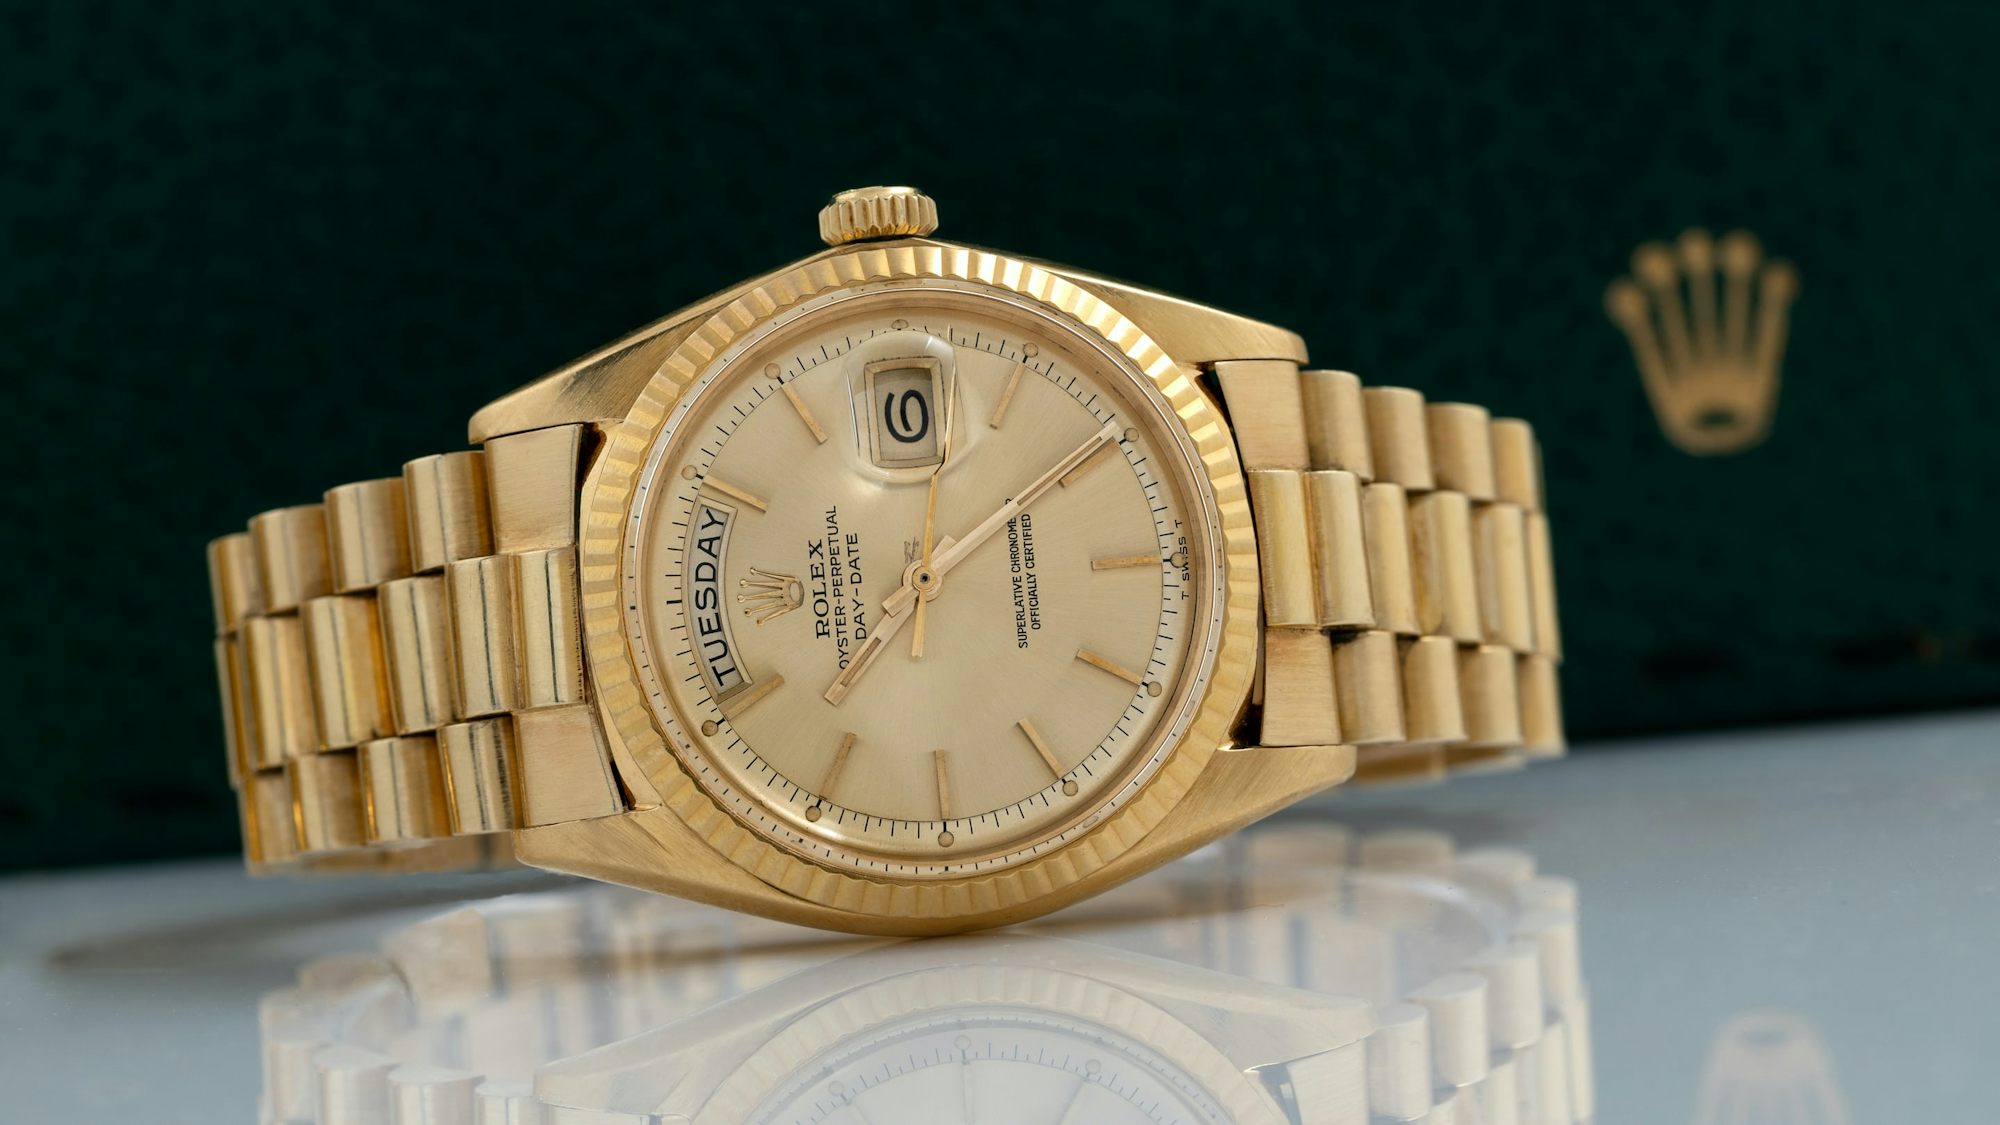 A yellow-gold Rolex Day-Date.